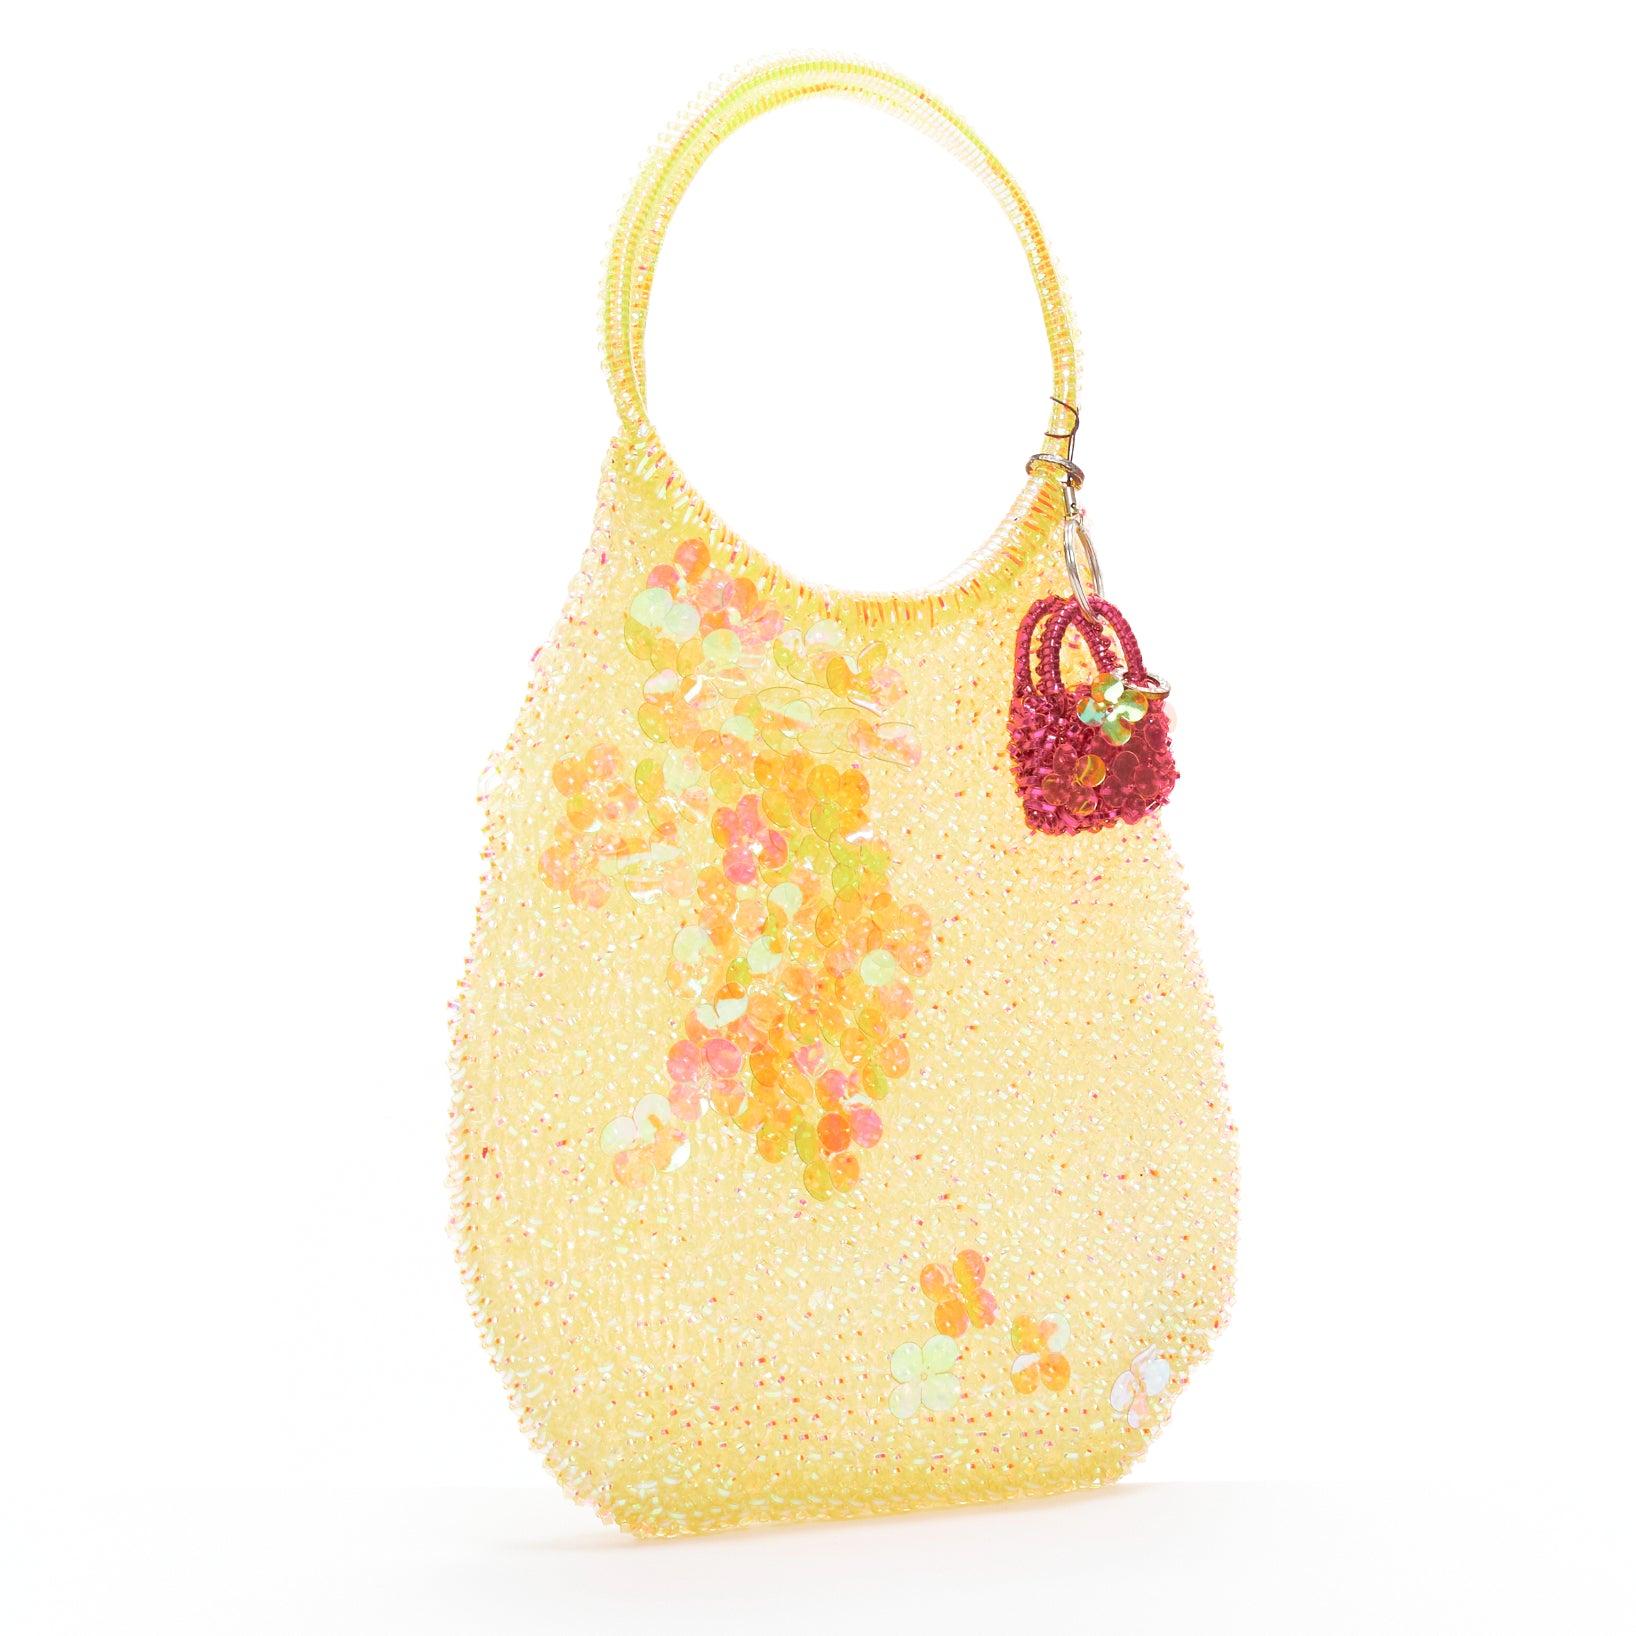 Orange ANTEPRIMA Wire Bag iridescent floral sequins micro charm teardrop tote For Sale